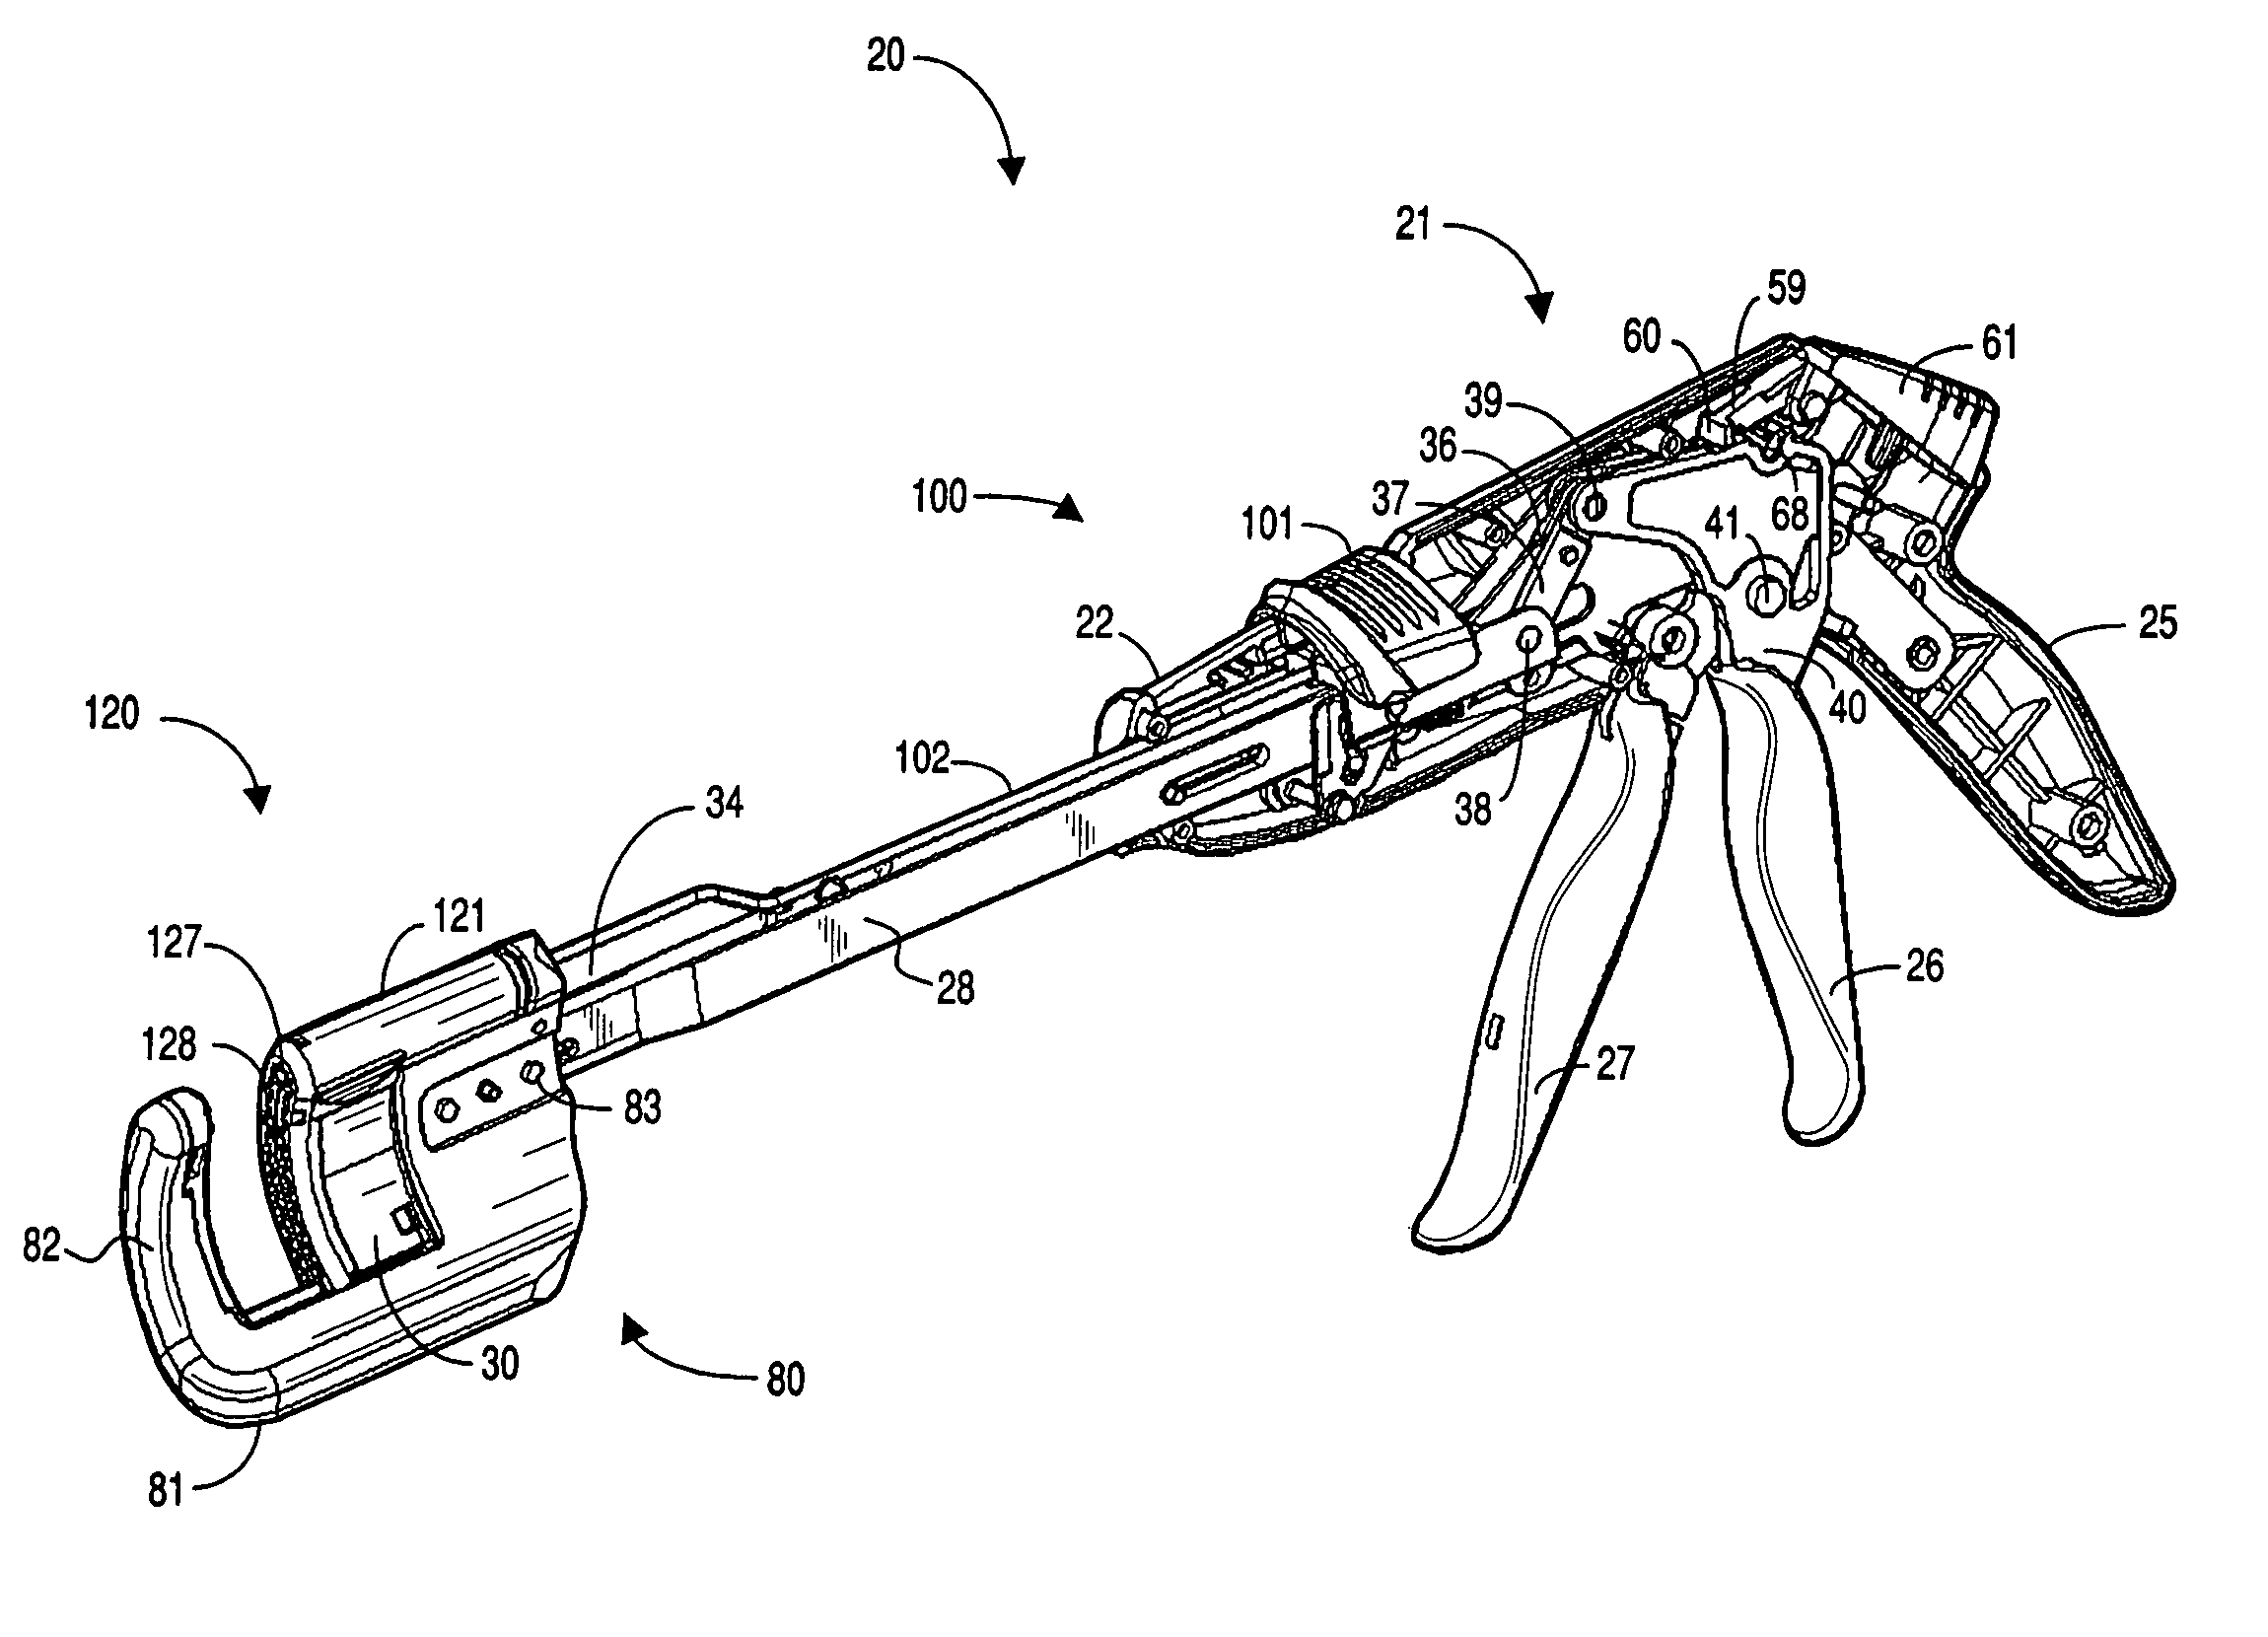 Retaining pin lever advancement mechanism for a curved cutter stapler